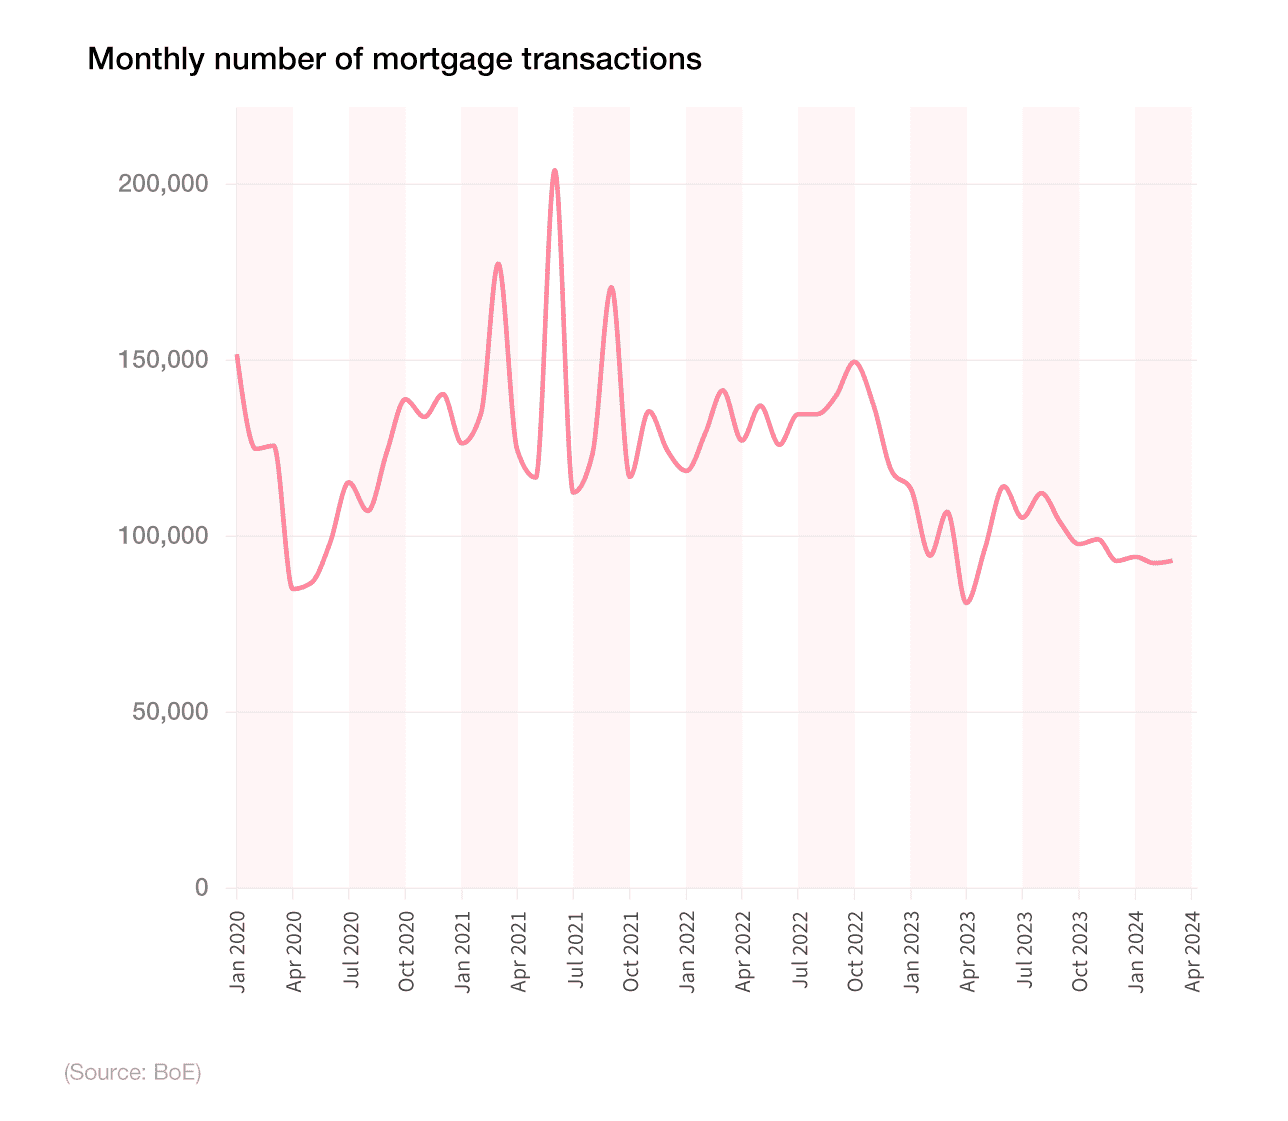 Line graph showing UK monthly mortgage transactions over time